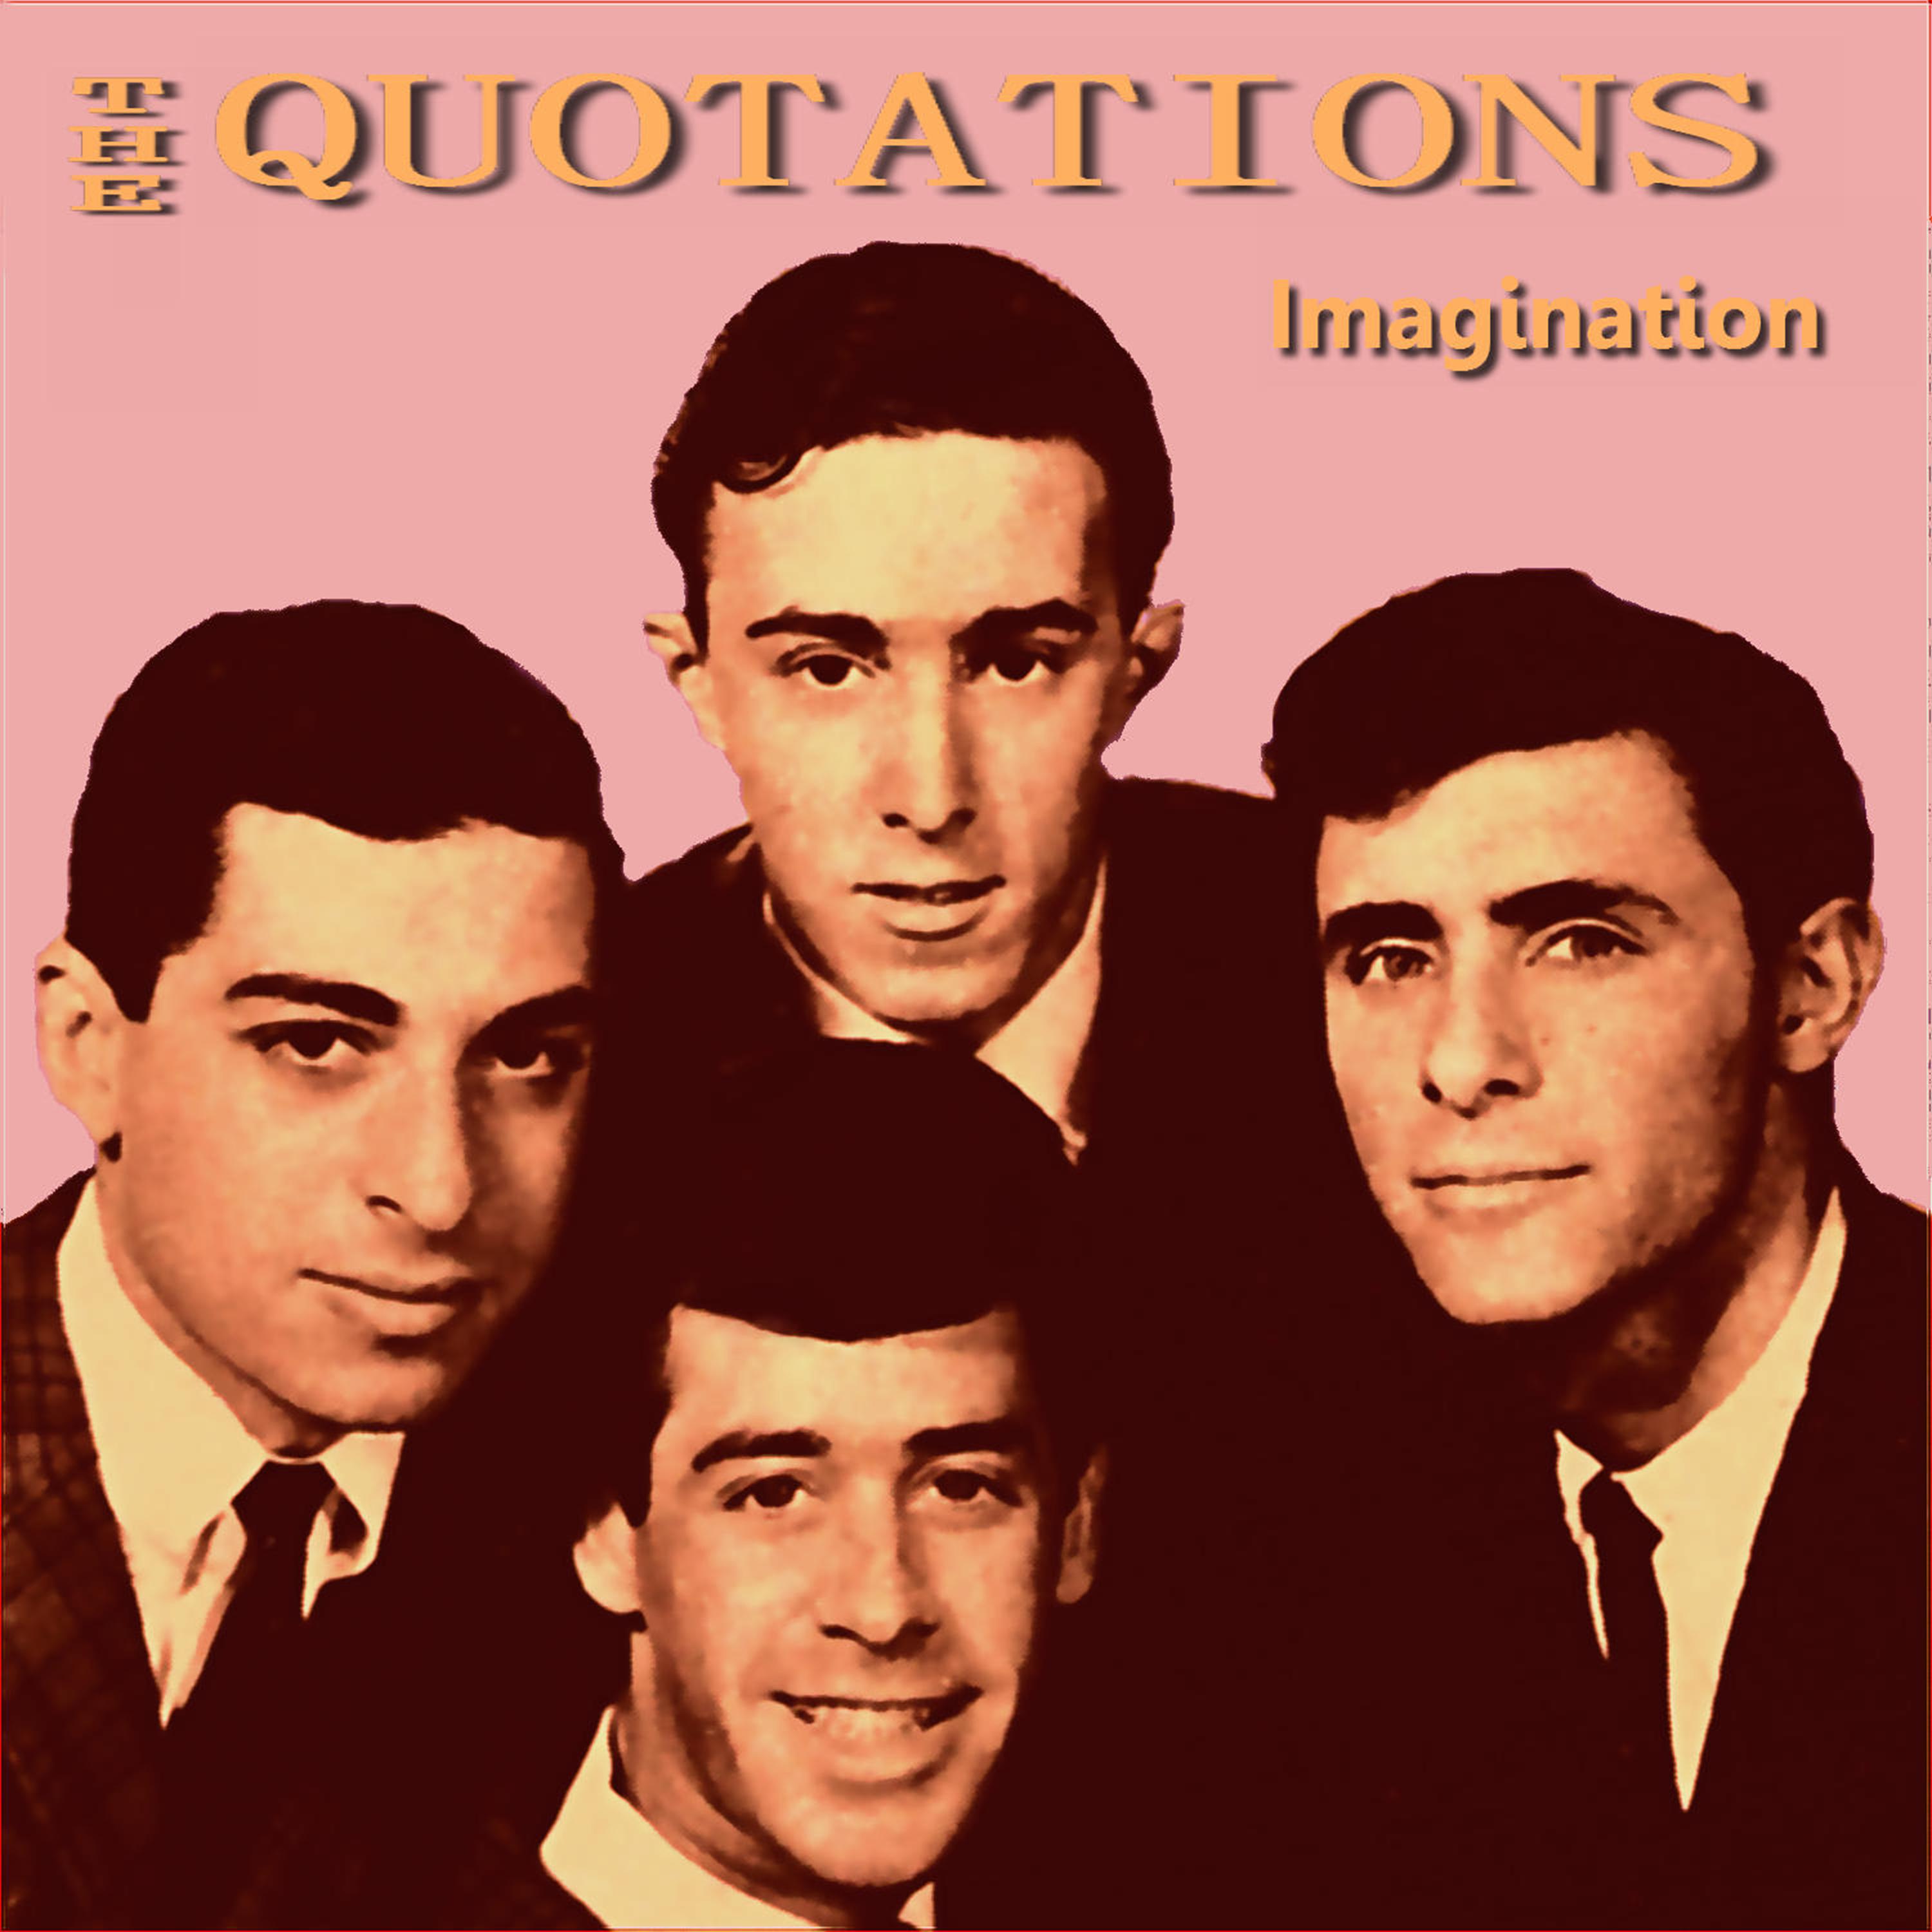 The Quotations - In the Night